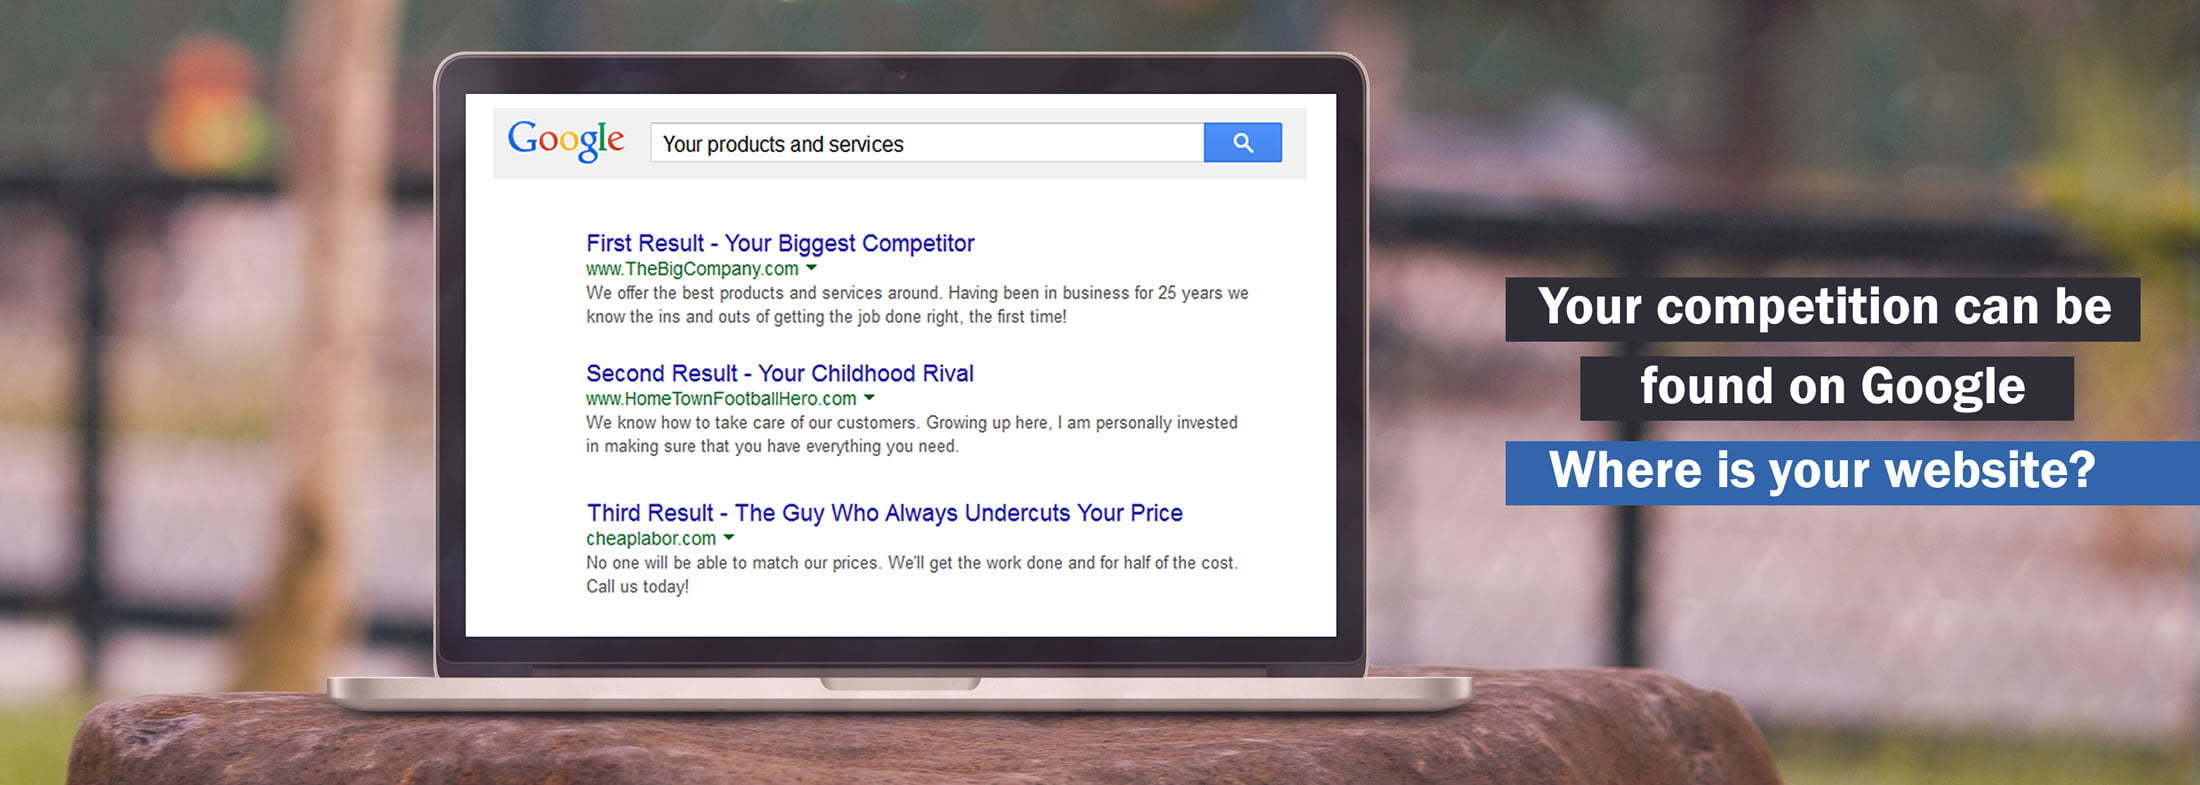 Laptop displaying search results with the statement, "Your competition can be found on Google. Where is your website?"